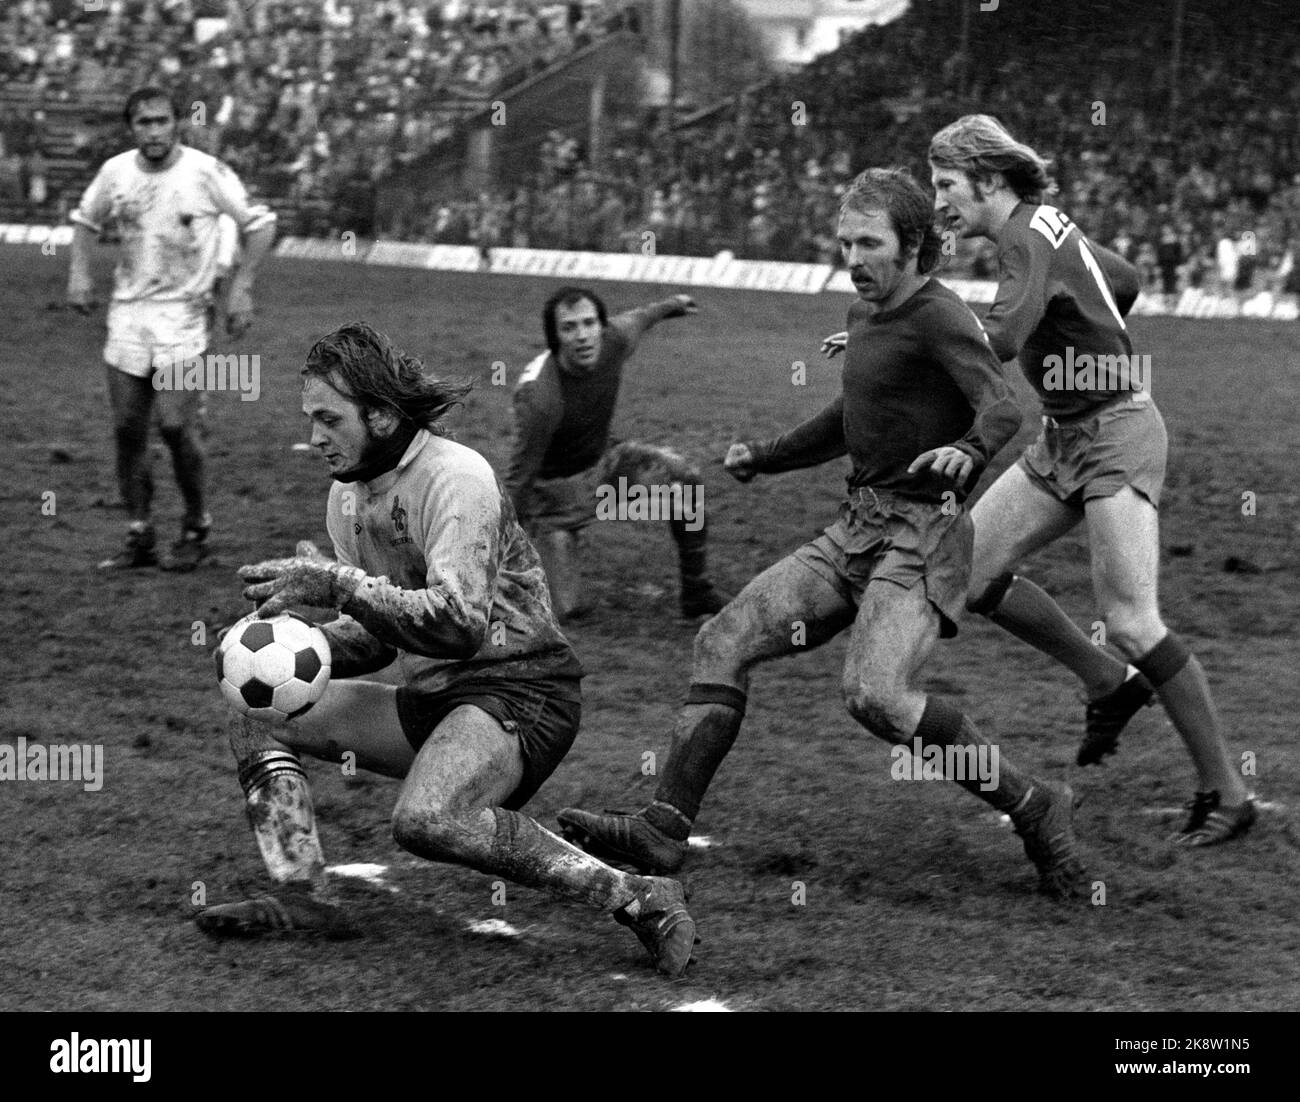 Oslo 19741020. Soccer. Cup final Skeid - Viking 3-1, Ullevaal Stadium. Skeid became Norwegian champions in the rain and sleet. In the picture, Bjørn Skjønsberg, Skeid, attacks, but Vikings keeper Erik Johannessen saves. The other Skeid players are Bent Hinze and Frank Olafsen (farthest away). Photo NTB / NTB Stock Photo